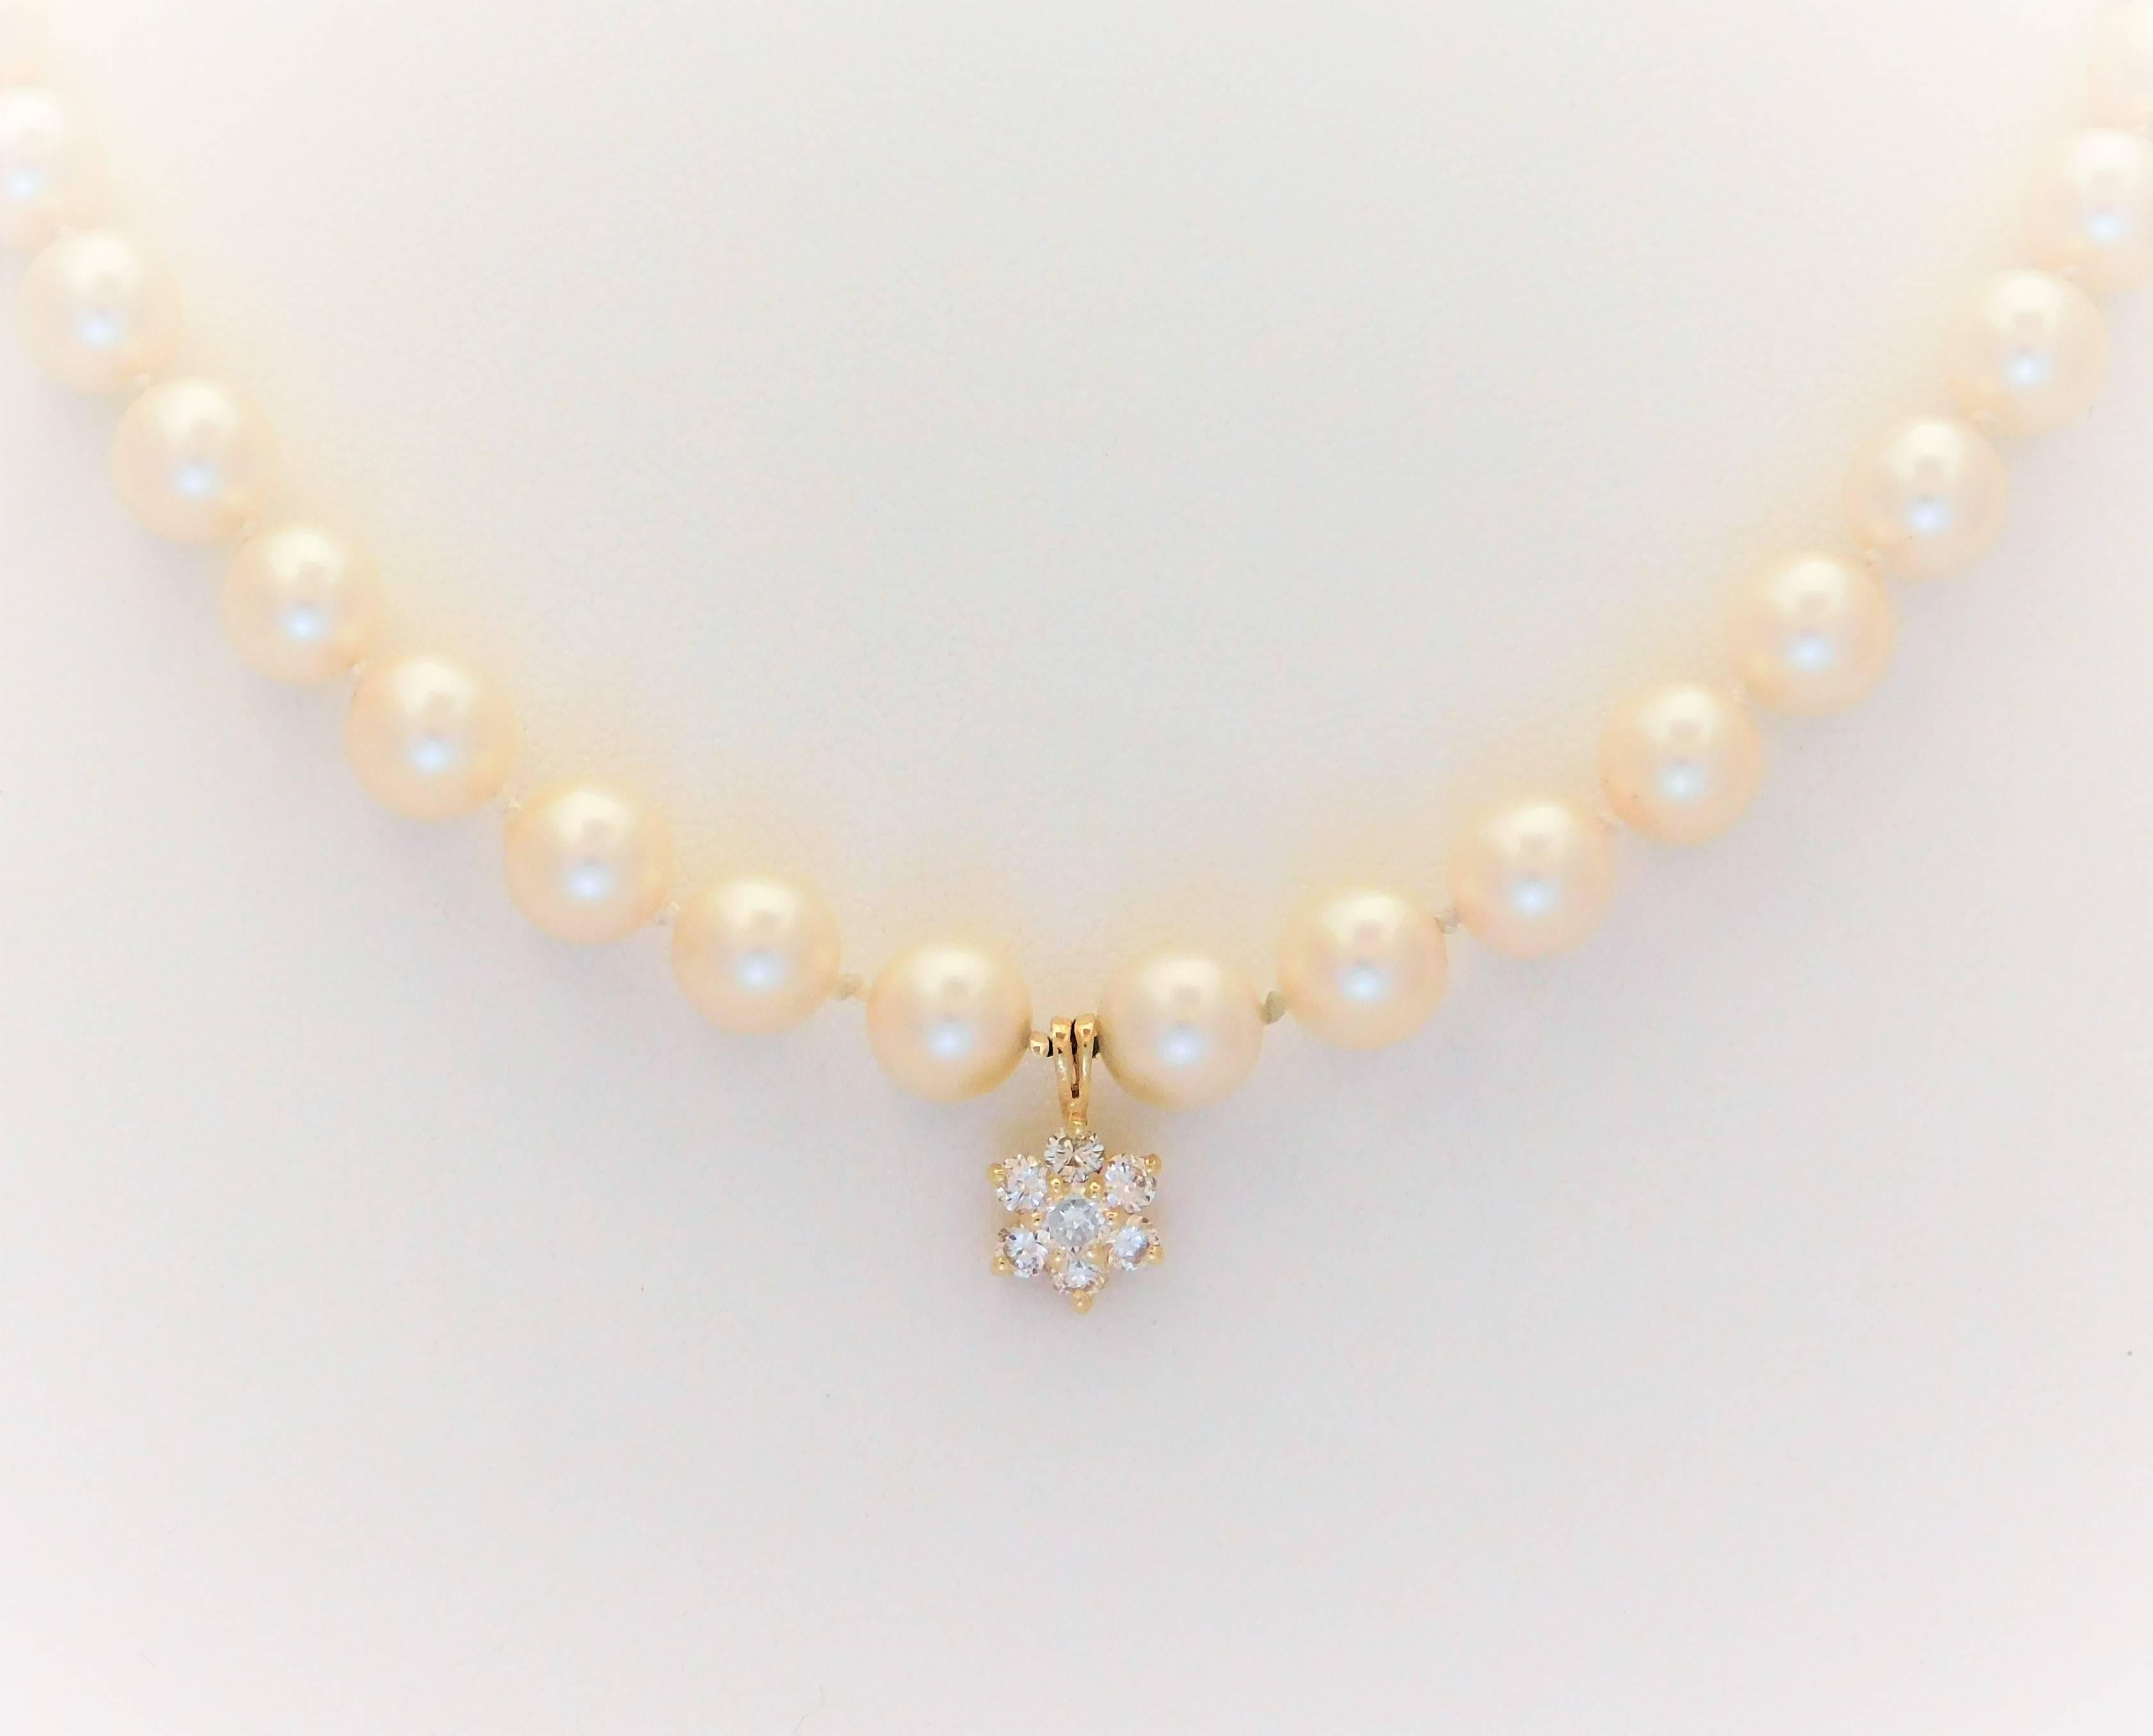 Modernist Midcentury White Pearl and 14 Karat Gold Necklace with Diamond Star Pendant